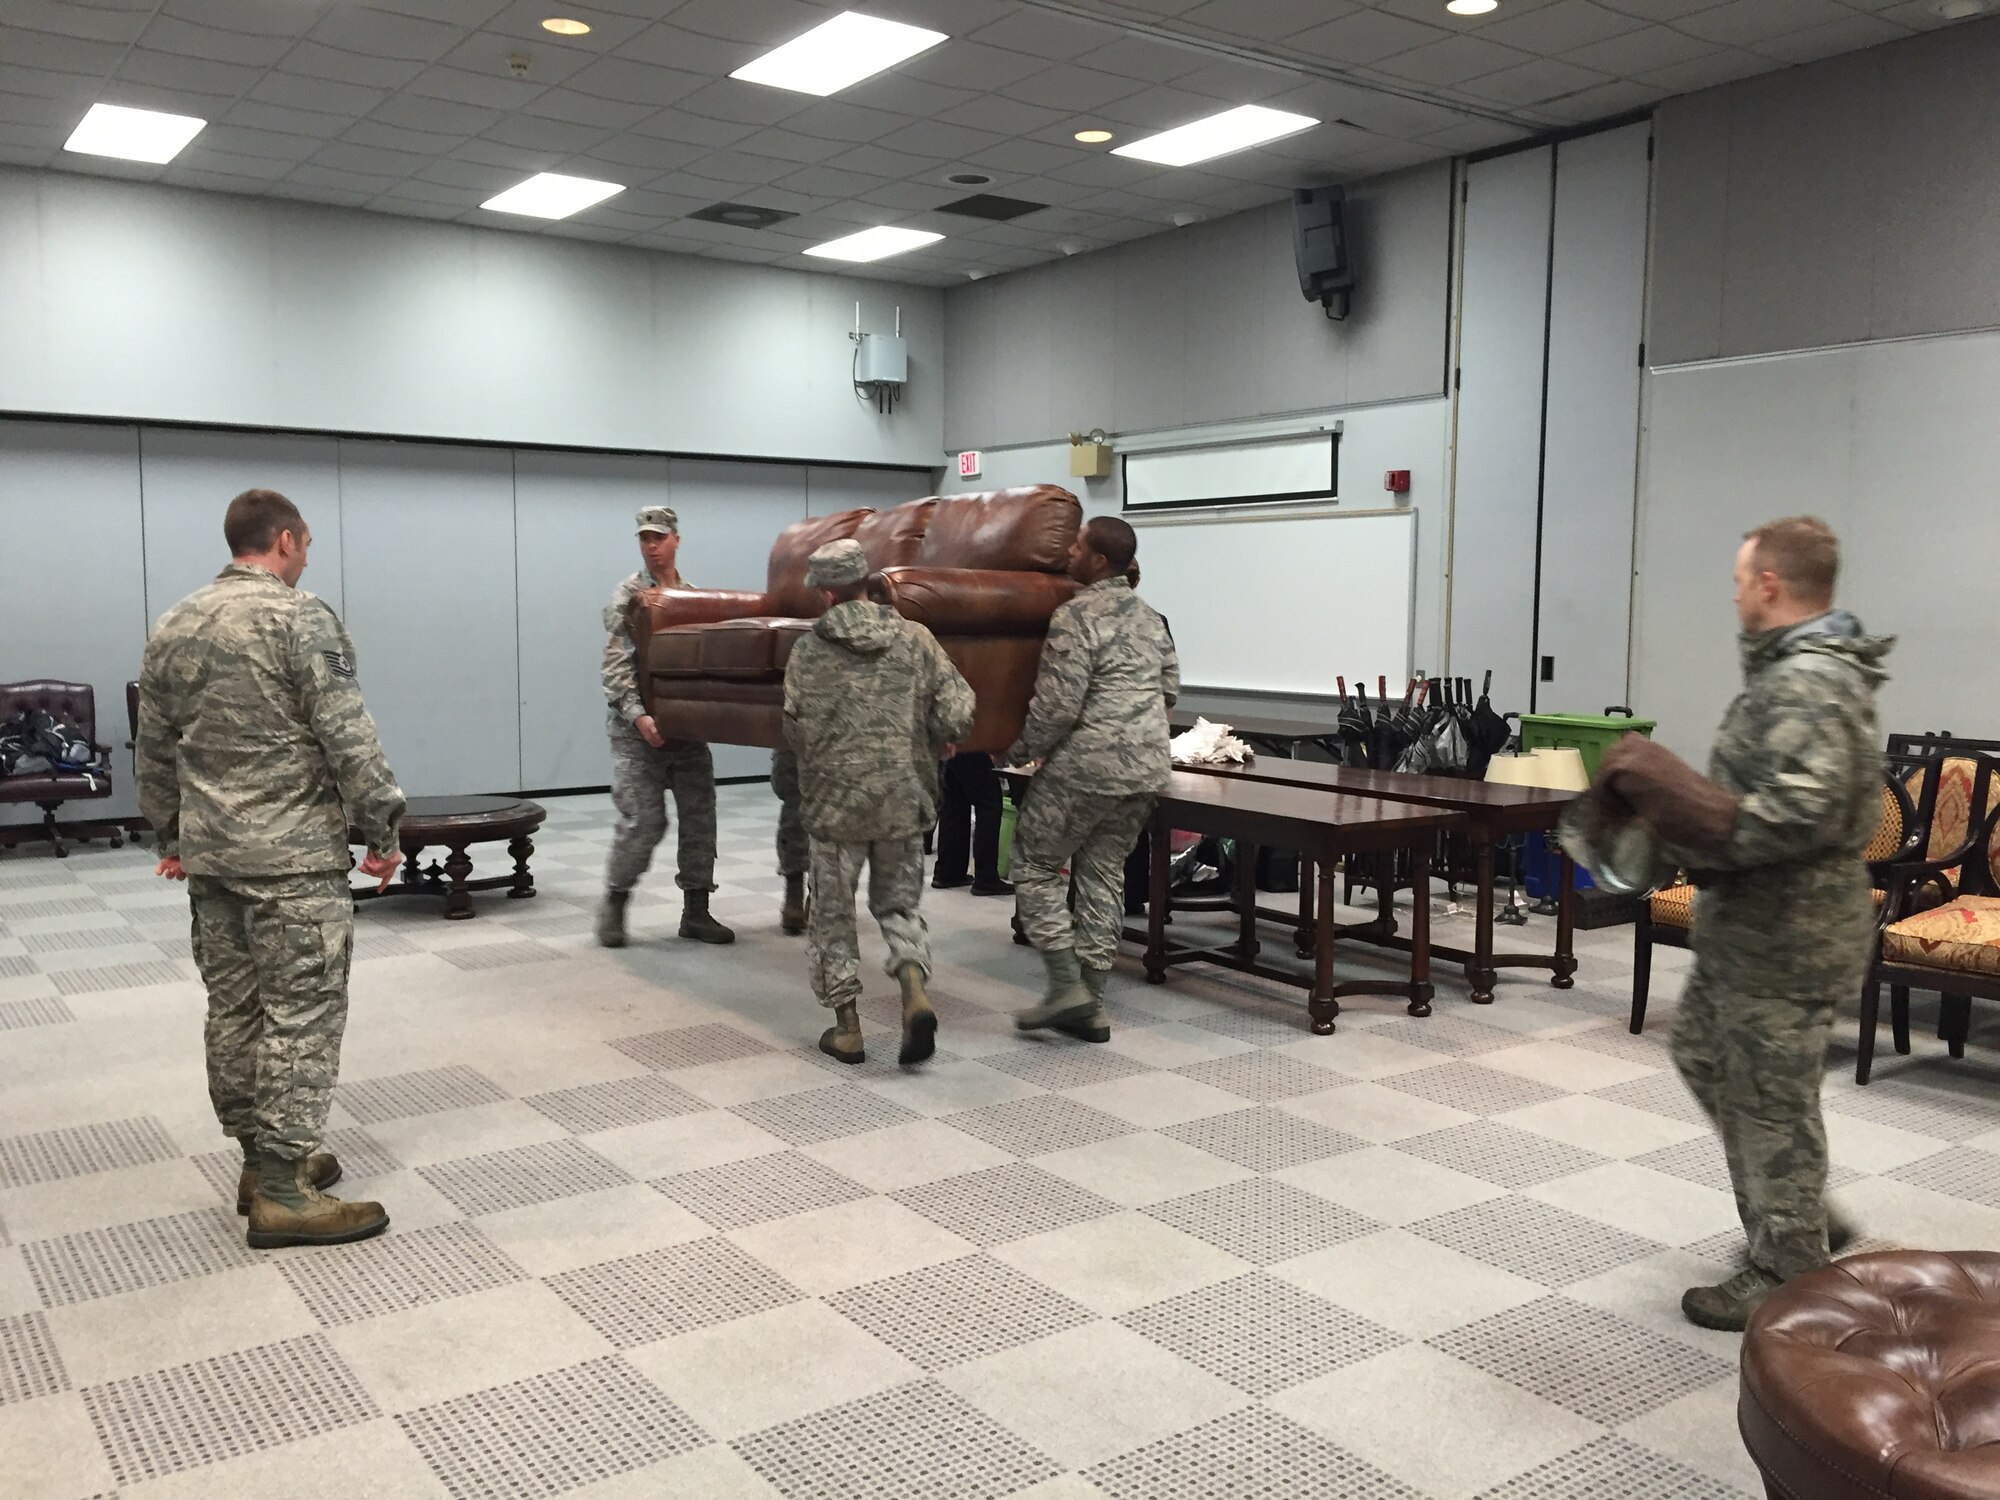 Delaware Air National Guard and Air Force Mortuary Affairs Operations personnel work together to create an area for families of the fallen in the Loffel Room of the Delaware Air National Guard Wing Headquarters Building, New Castle, Del., Dec. 23, 2015. The room was redesigned in a matter of hours when the dignified transfer mission diverted to the Guard Base due to weather. (U.S. Air Force photo/Roland Balik)